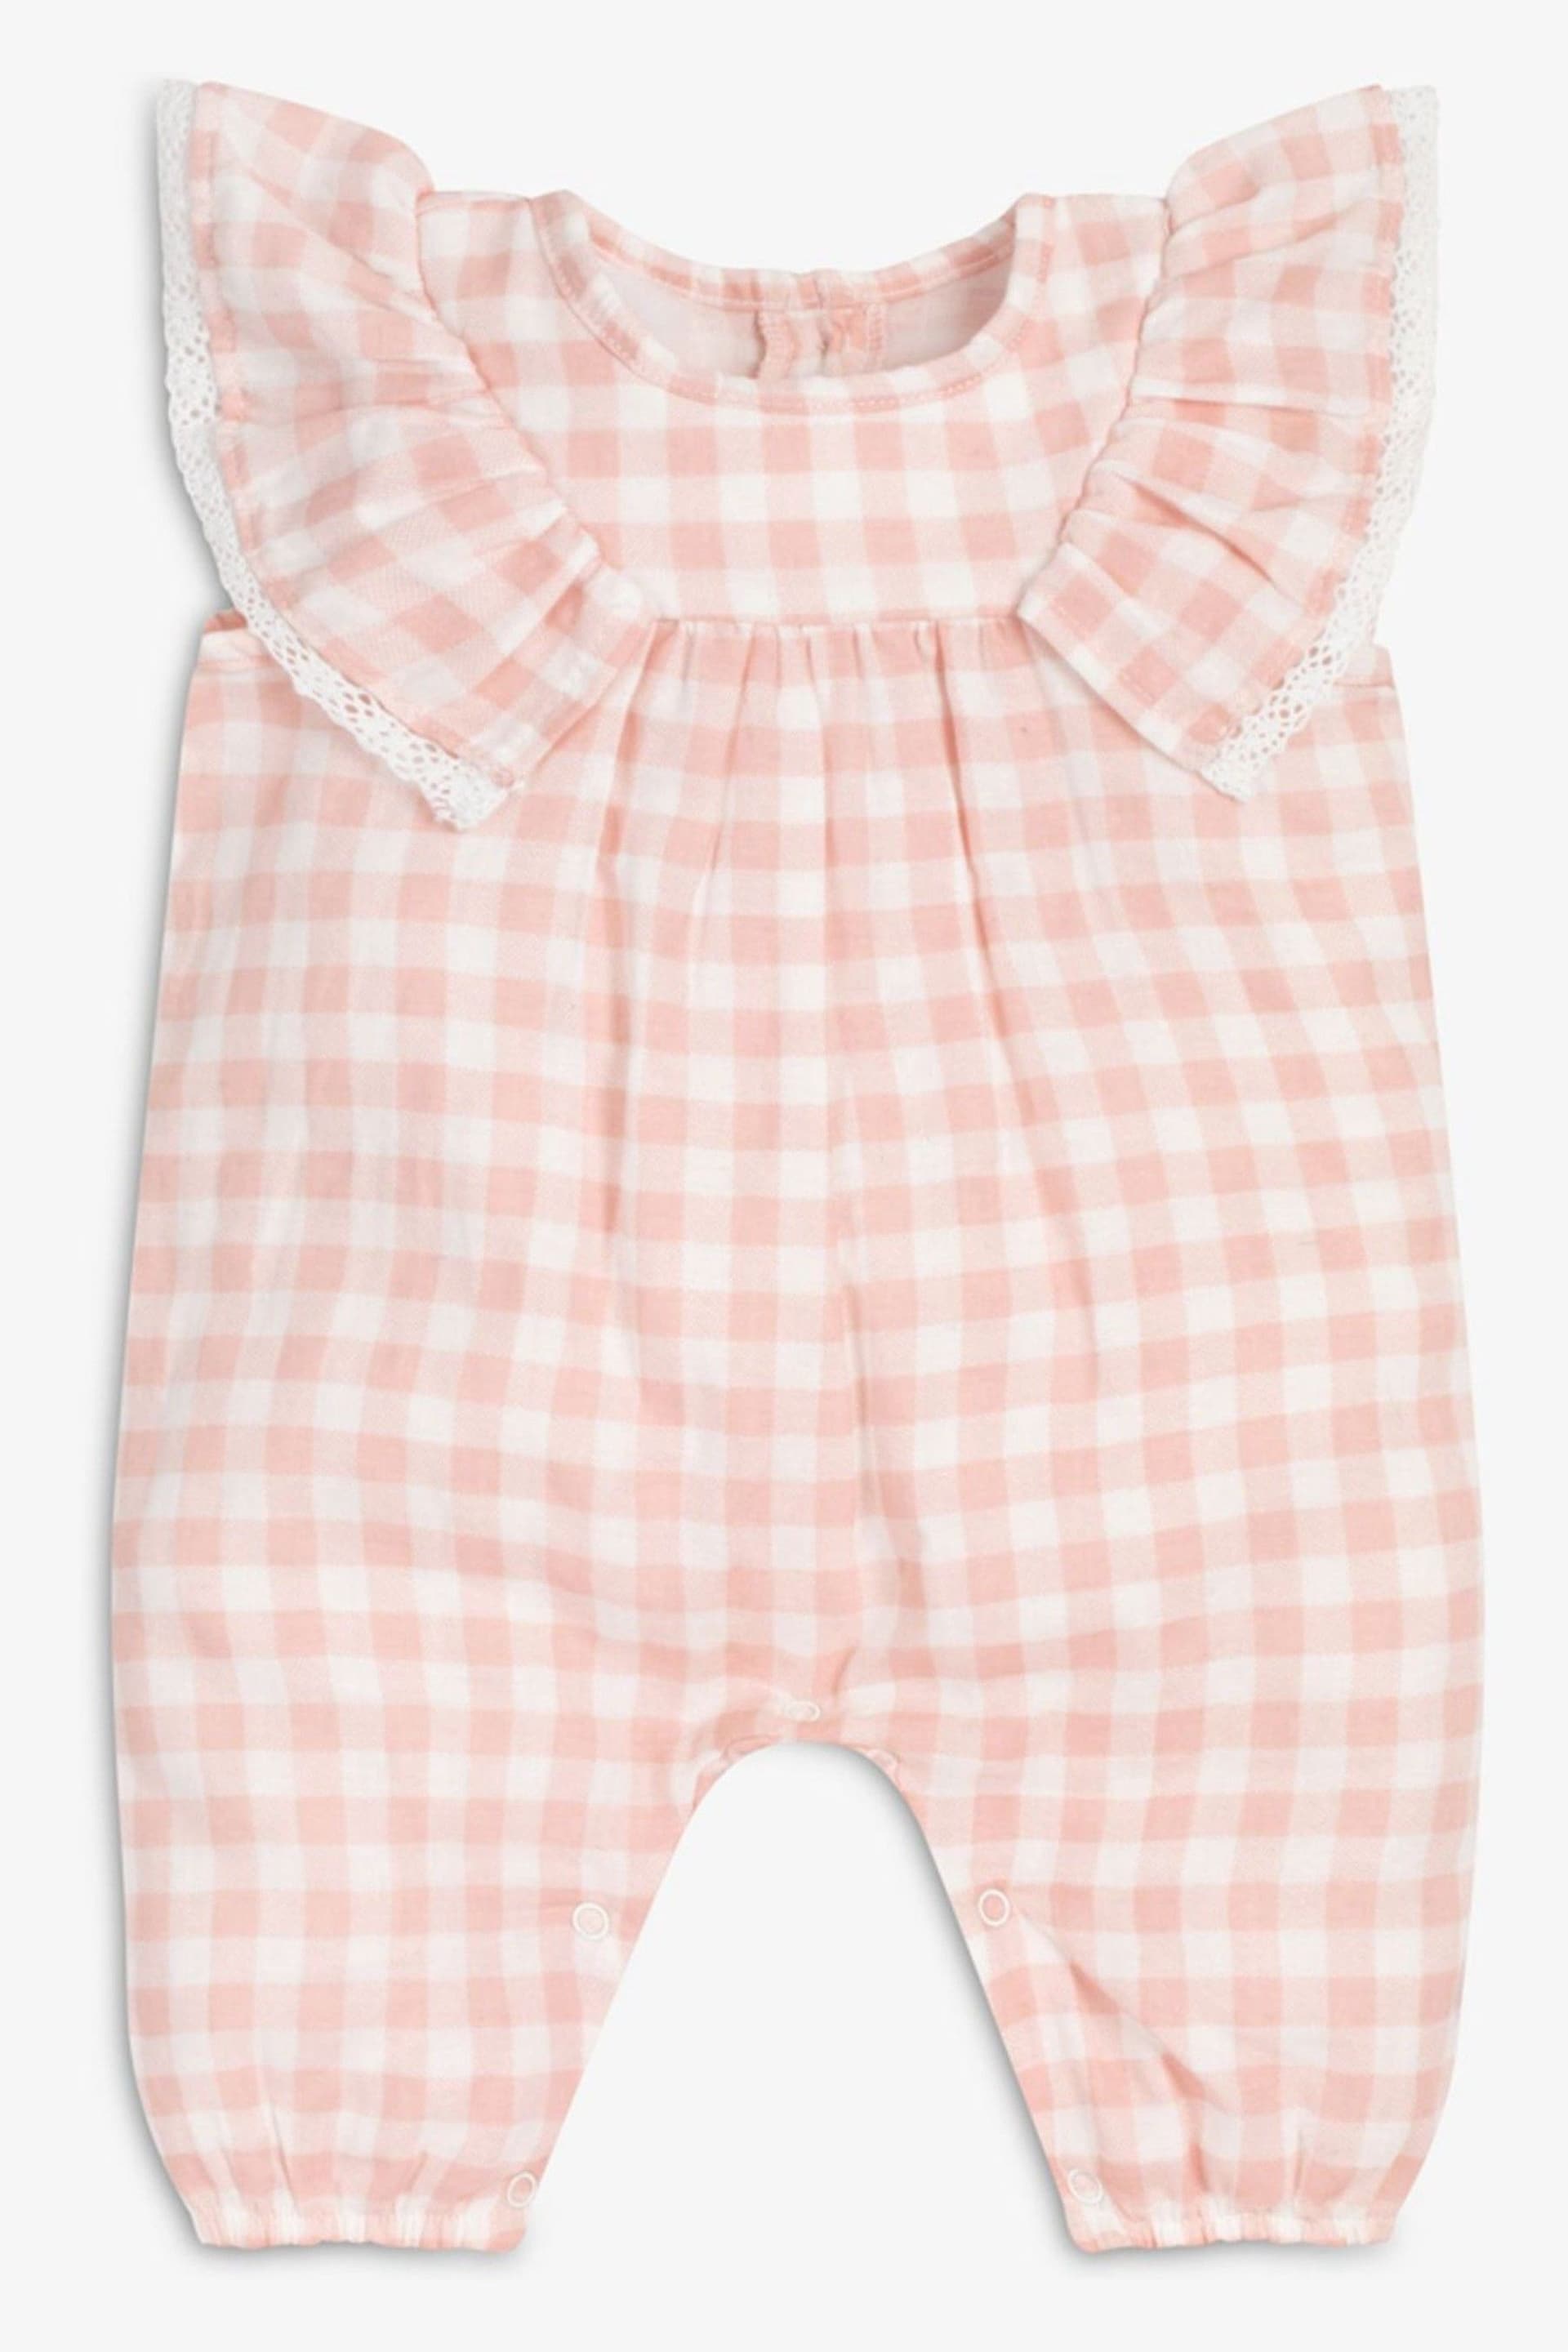 The Little Tailor Baby Cotton Muslin Playsuit - Image 4 of 7